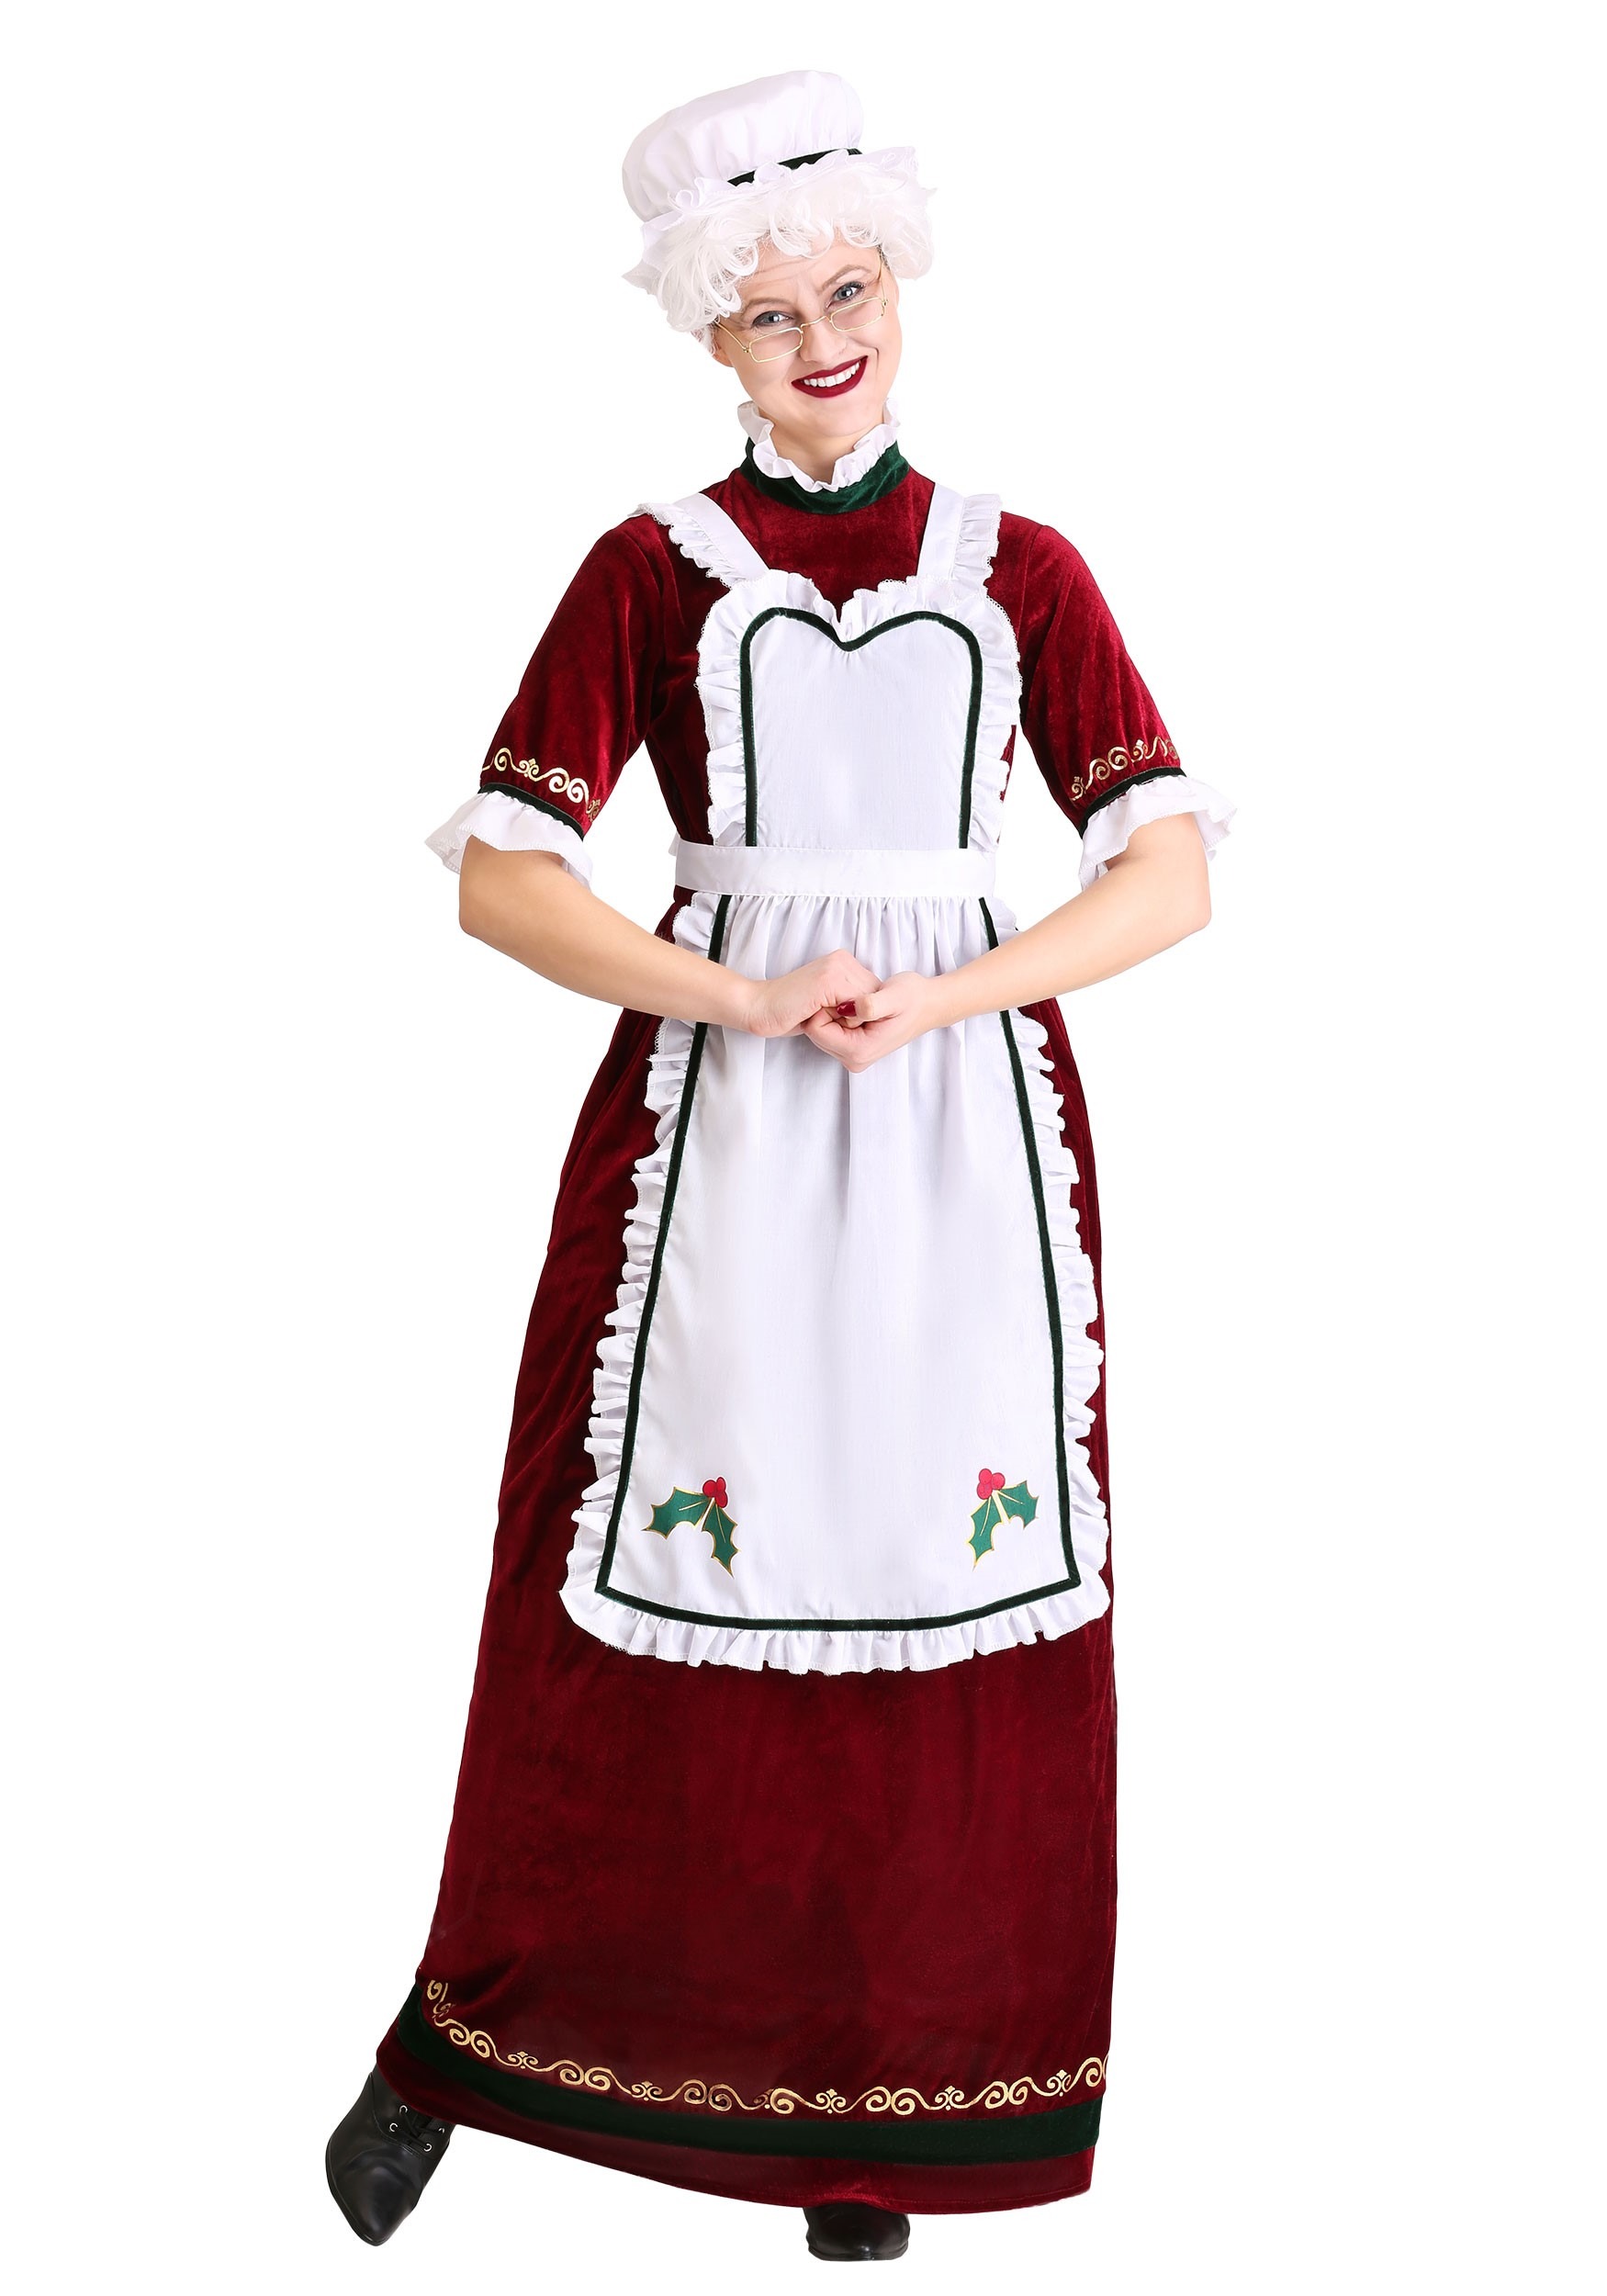 santa claus and mrs claus costumes